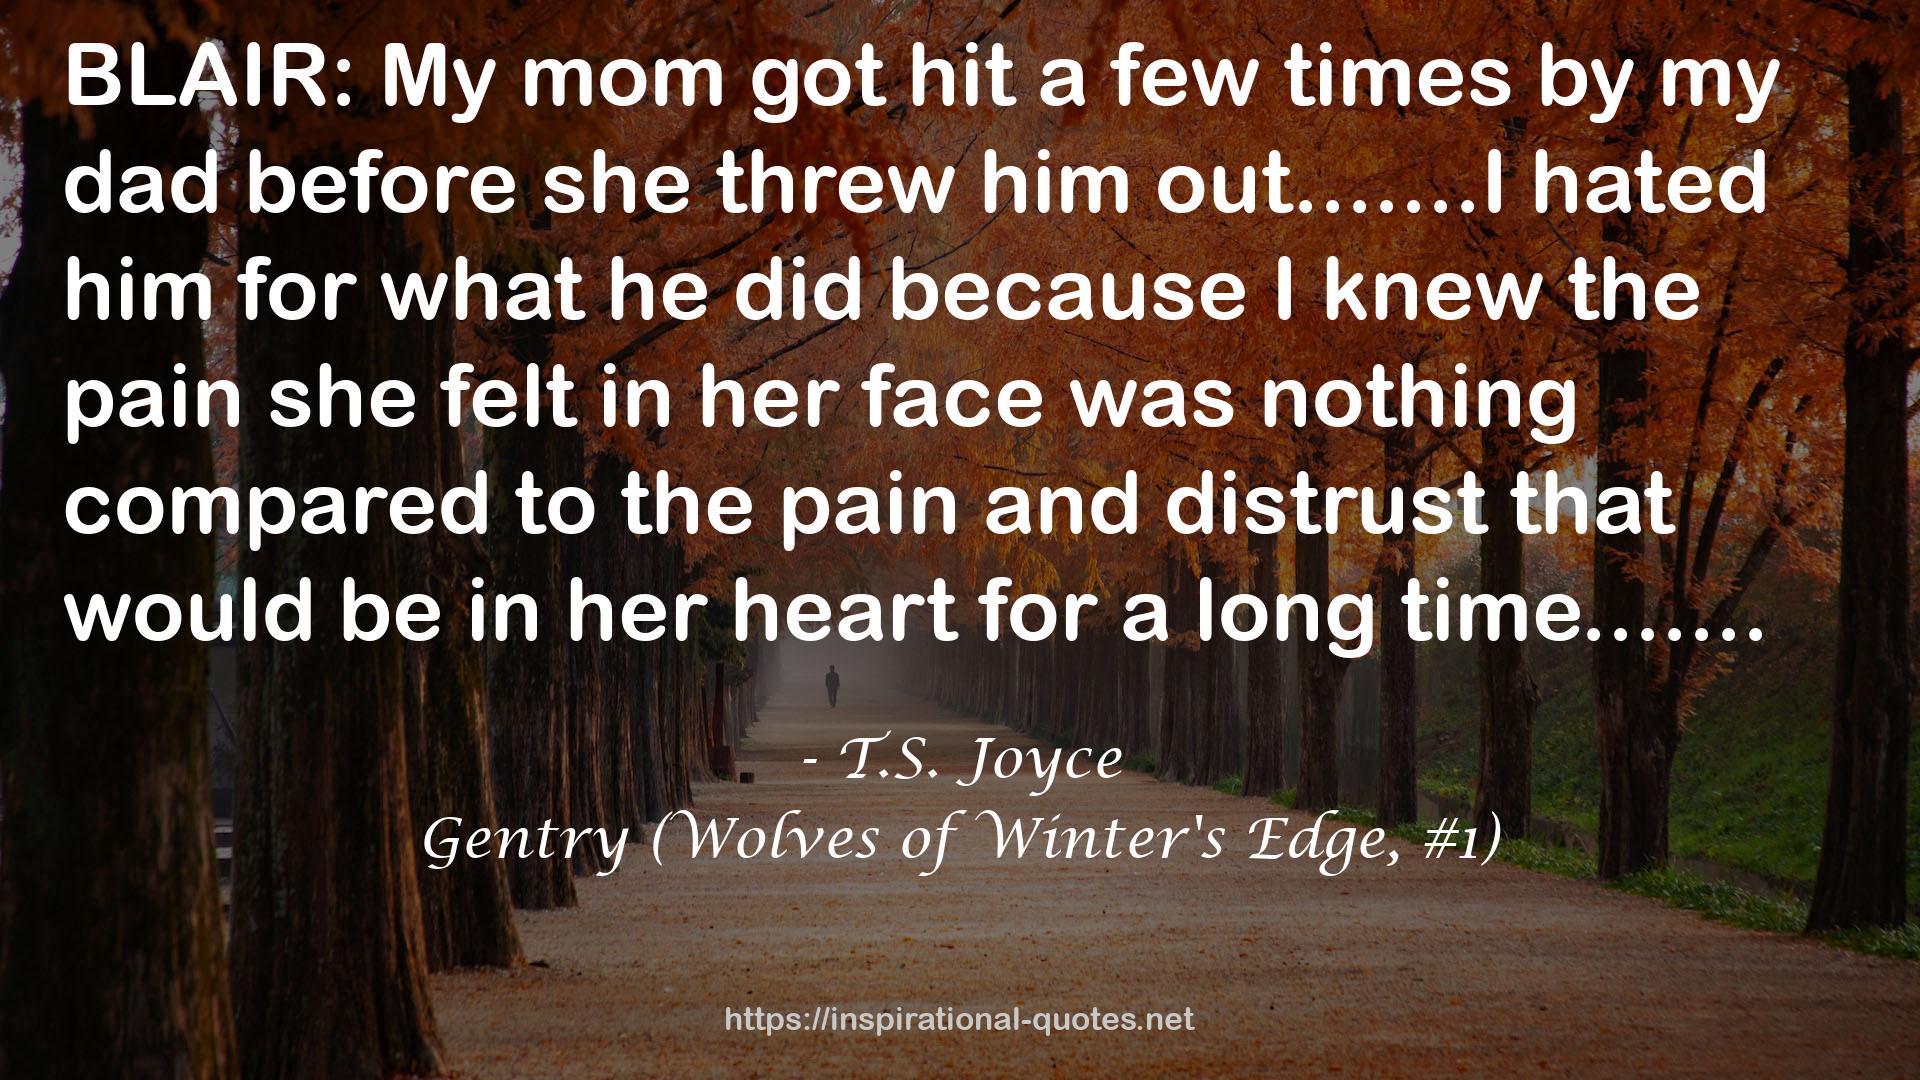 Gentry (Wolves of Winter's Edge, #1) QUOTES